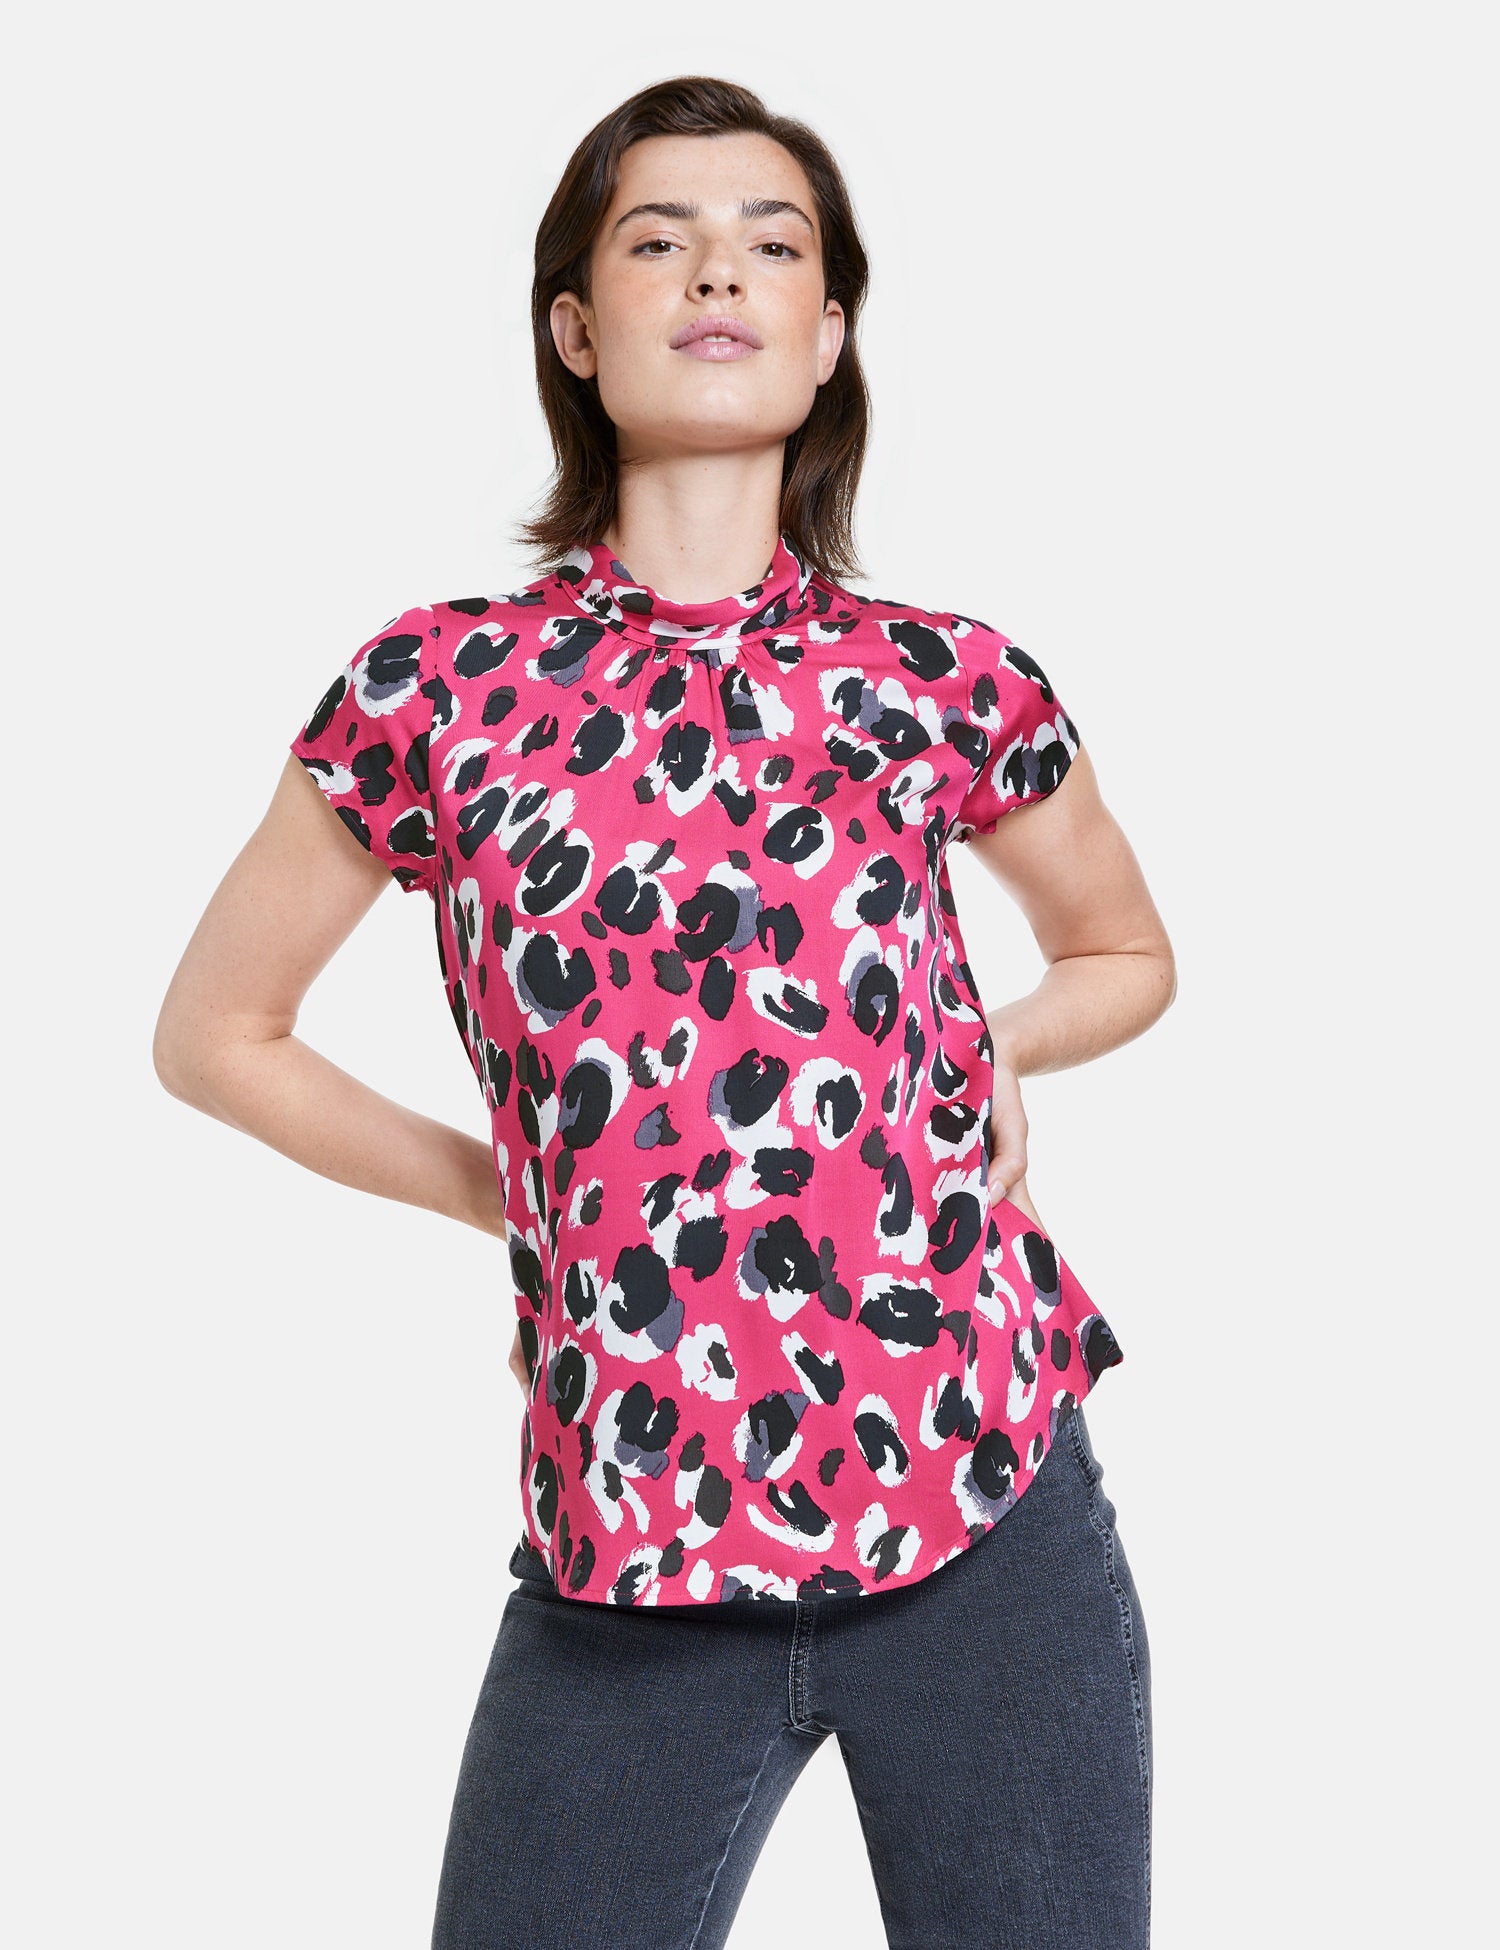 Blouse Top With A Leopard Pattern_460409-11210_3402_07